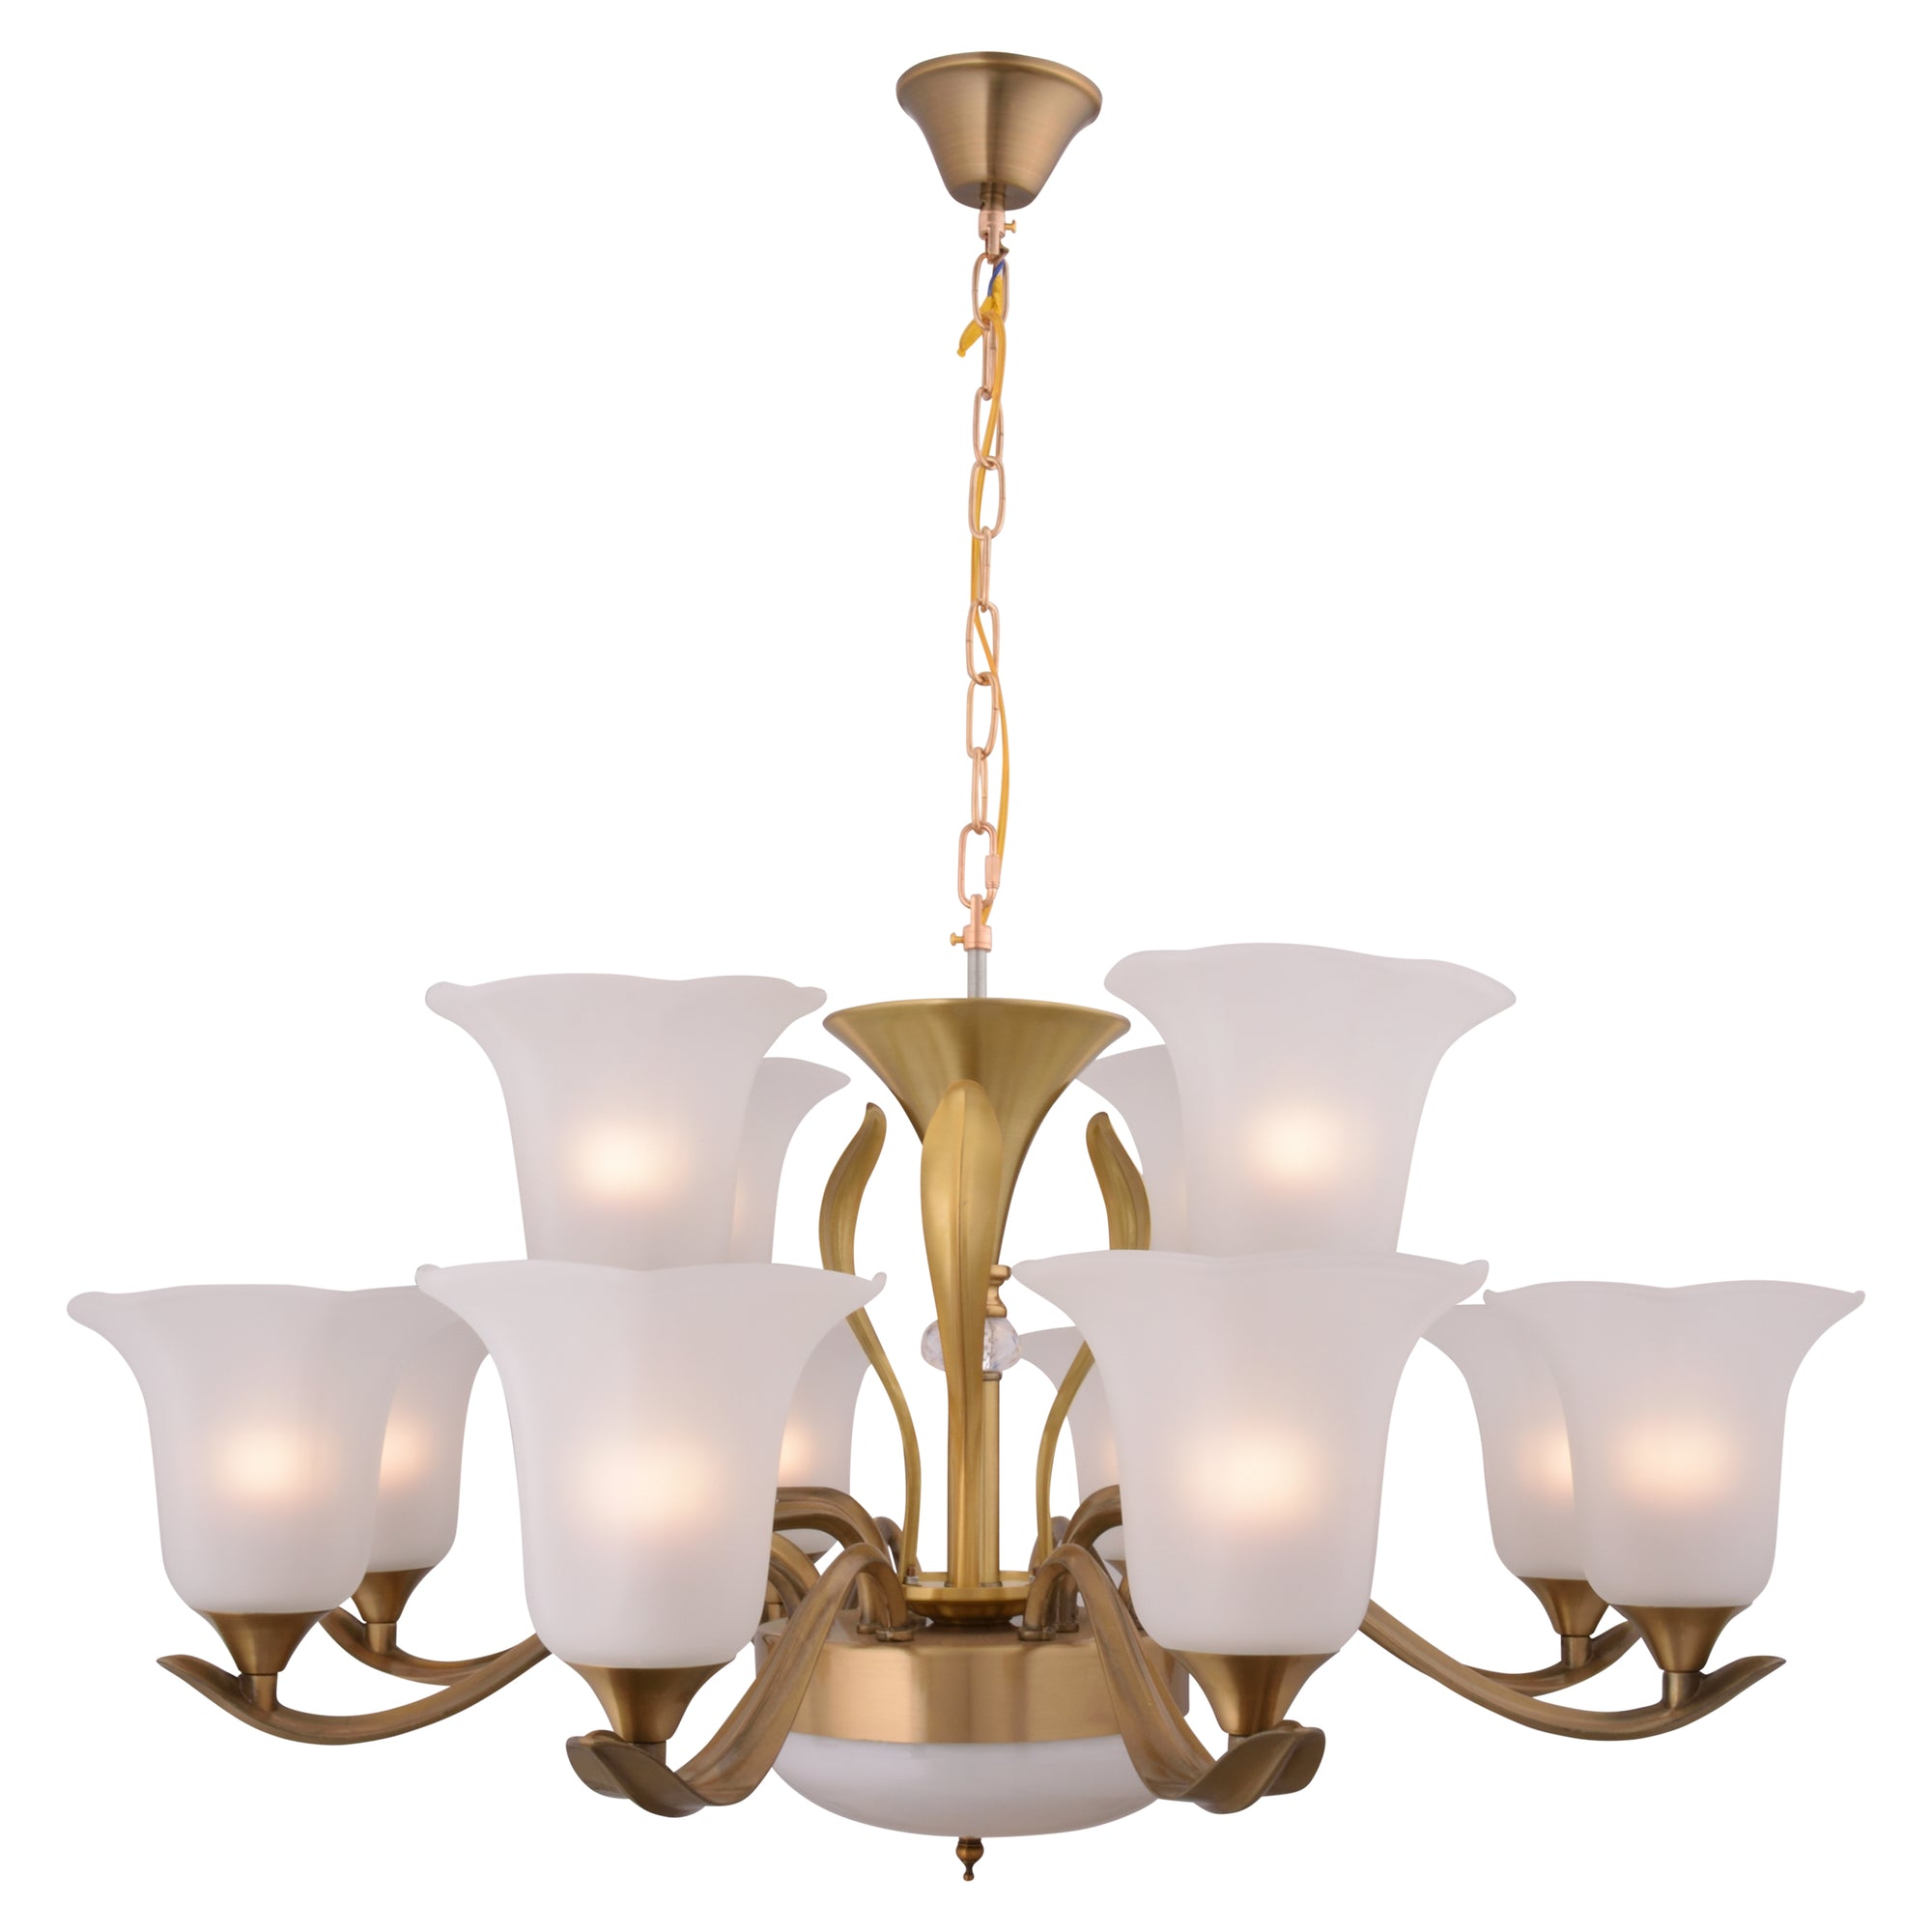 LINEARIS CHANDELIER (12 Arms)